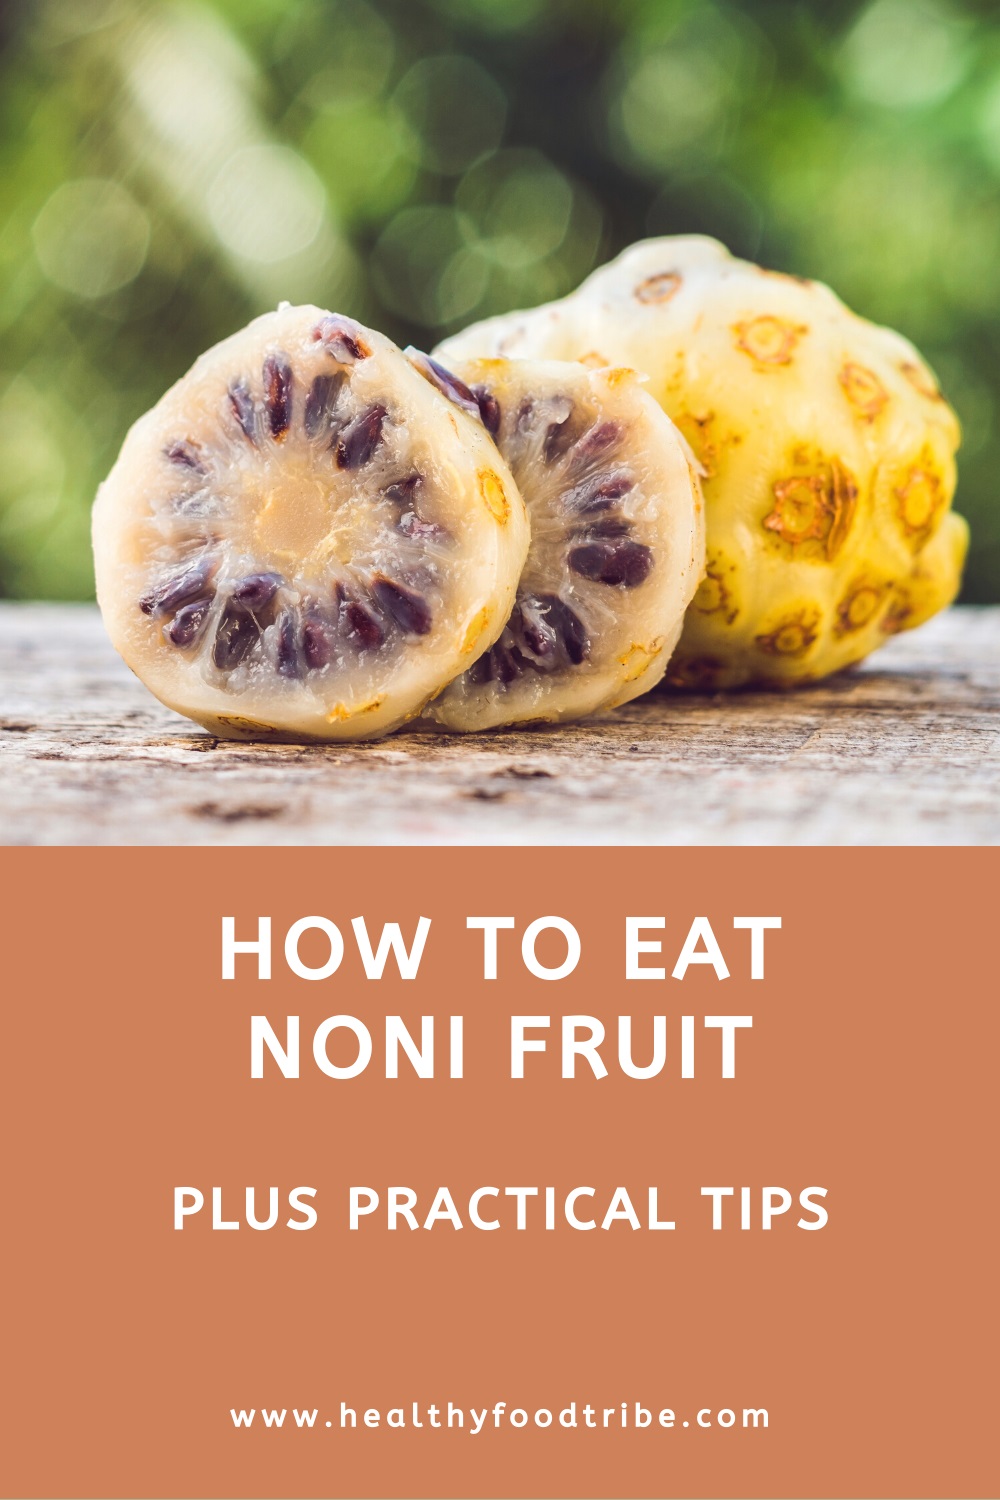 How to eat noni fruit (plus practical tips)